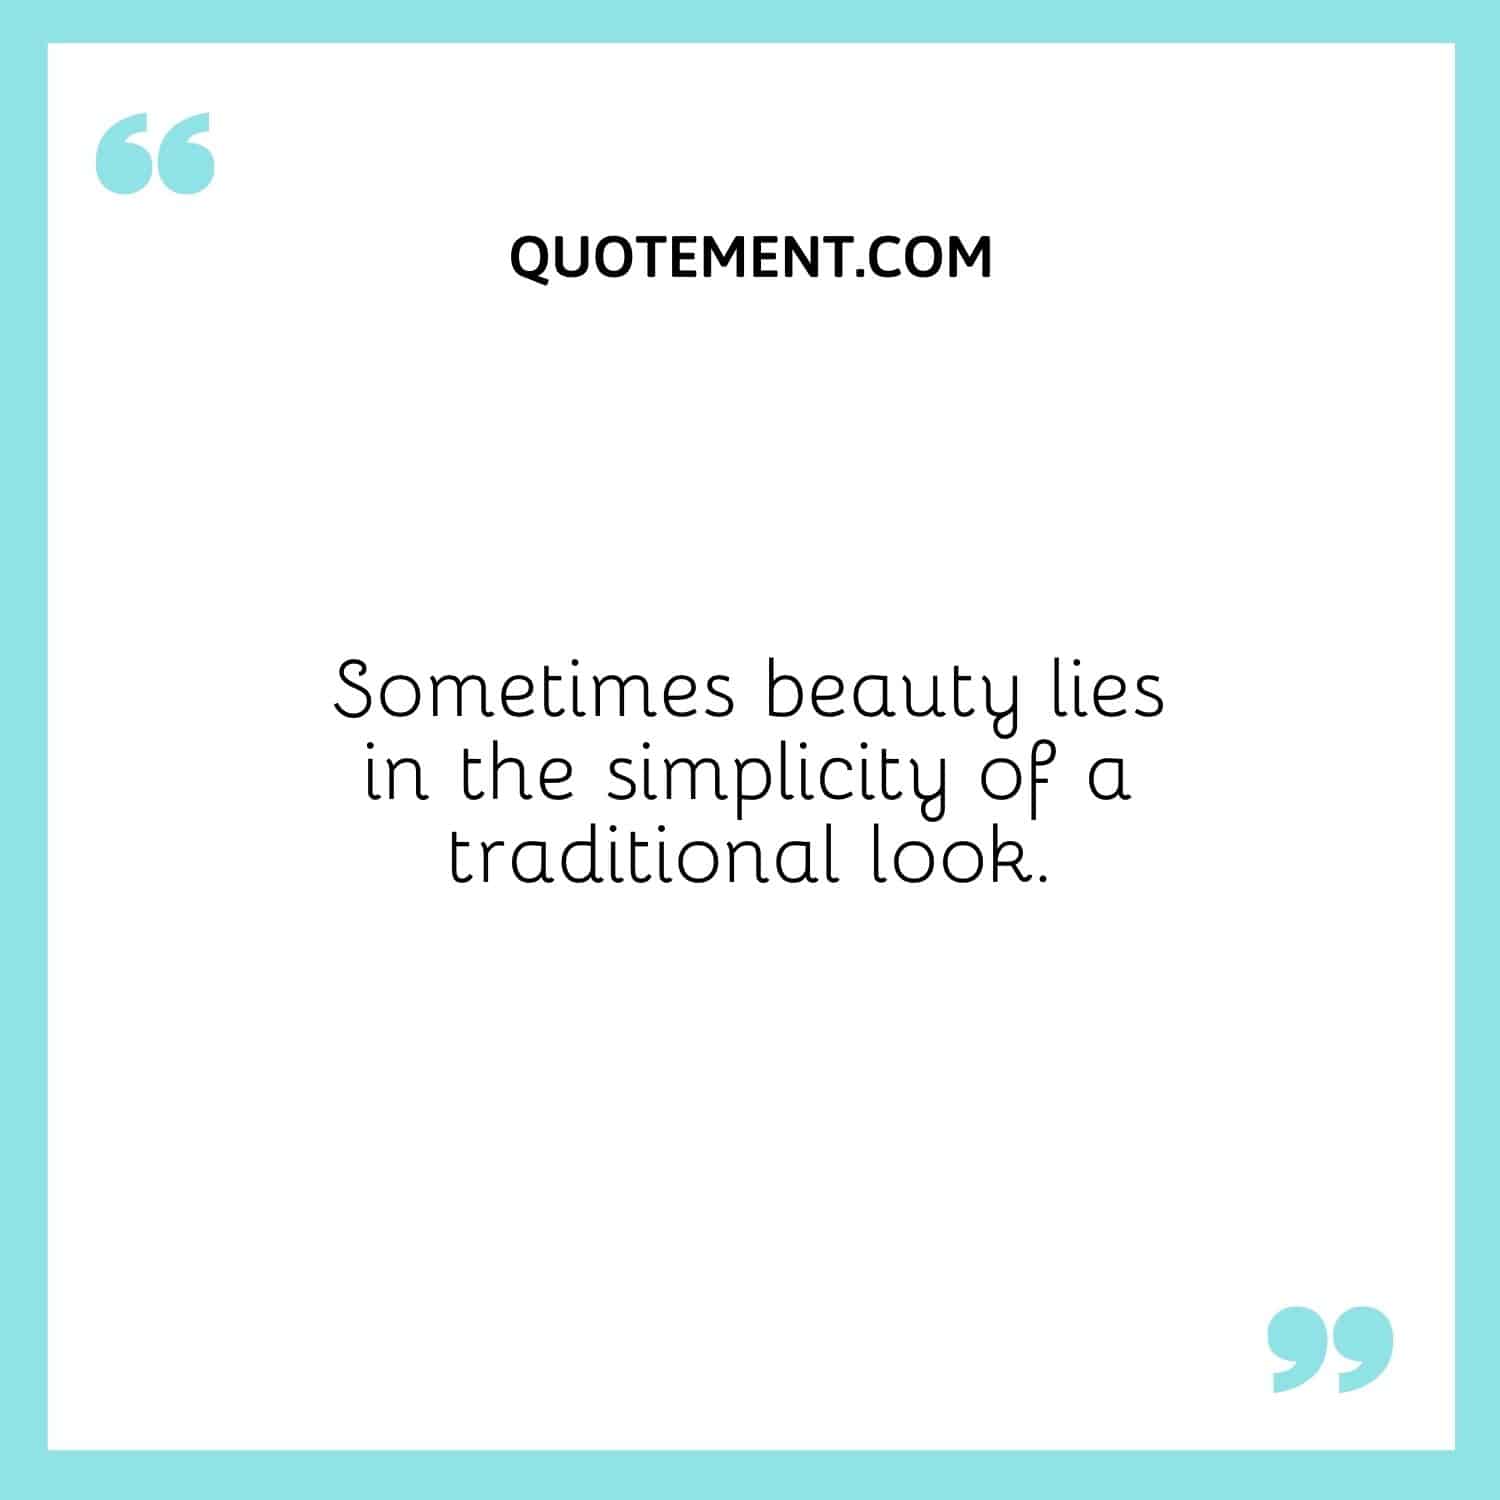 Sometimes beauty lies in the simplicity of a traditional look.